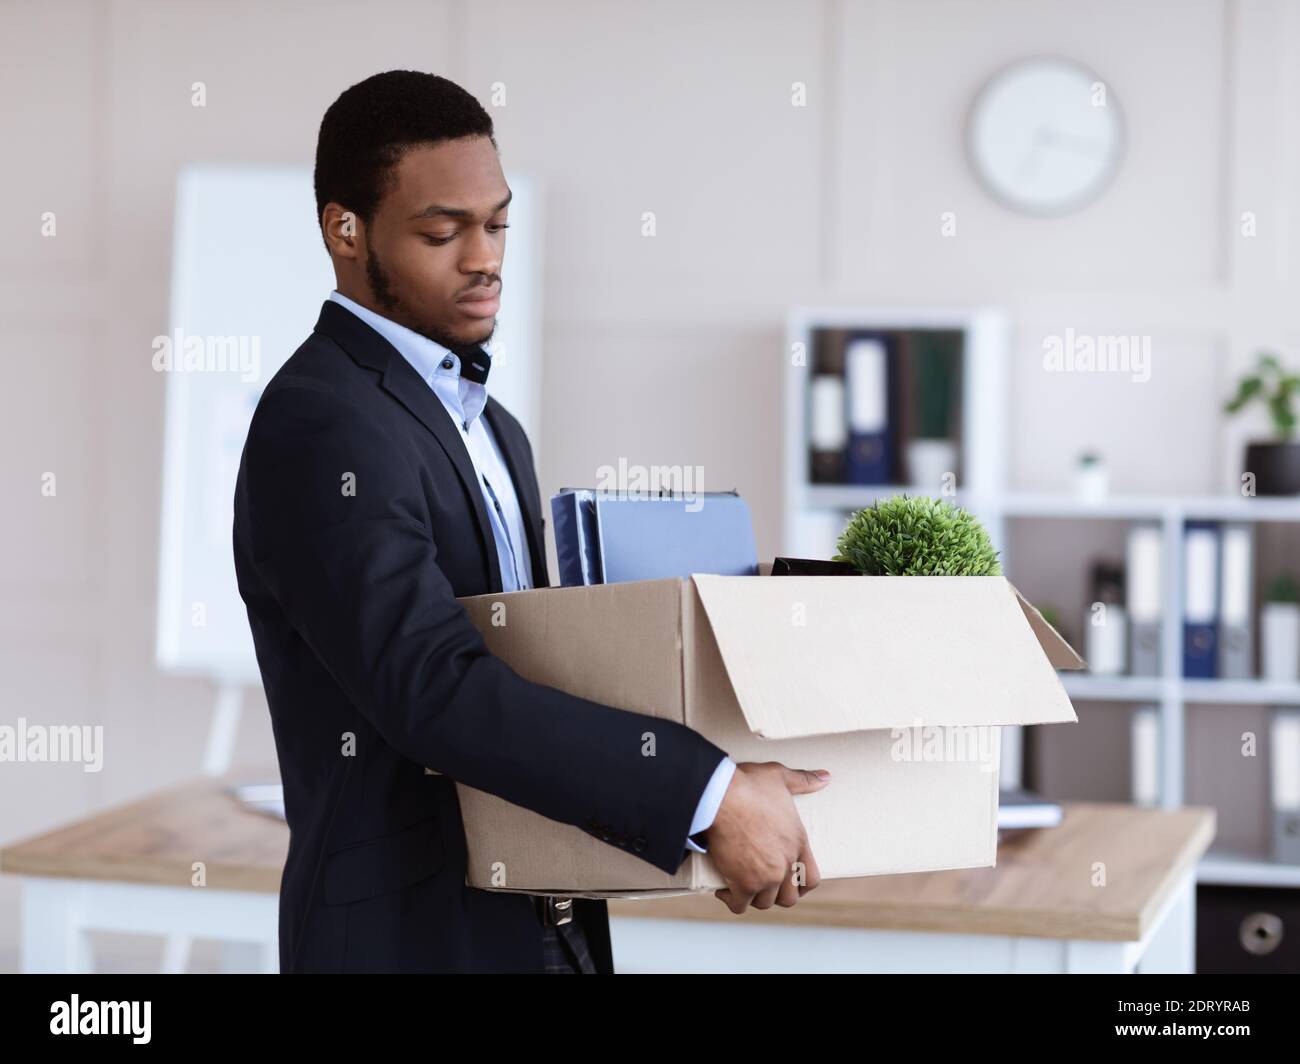 Upset black man got fired, holding box with his belongings Stock Photo